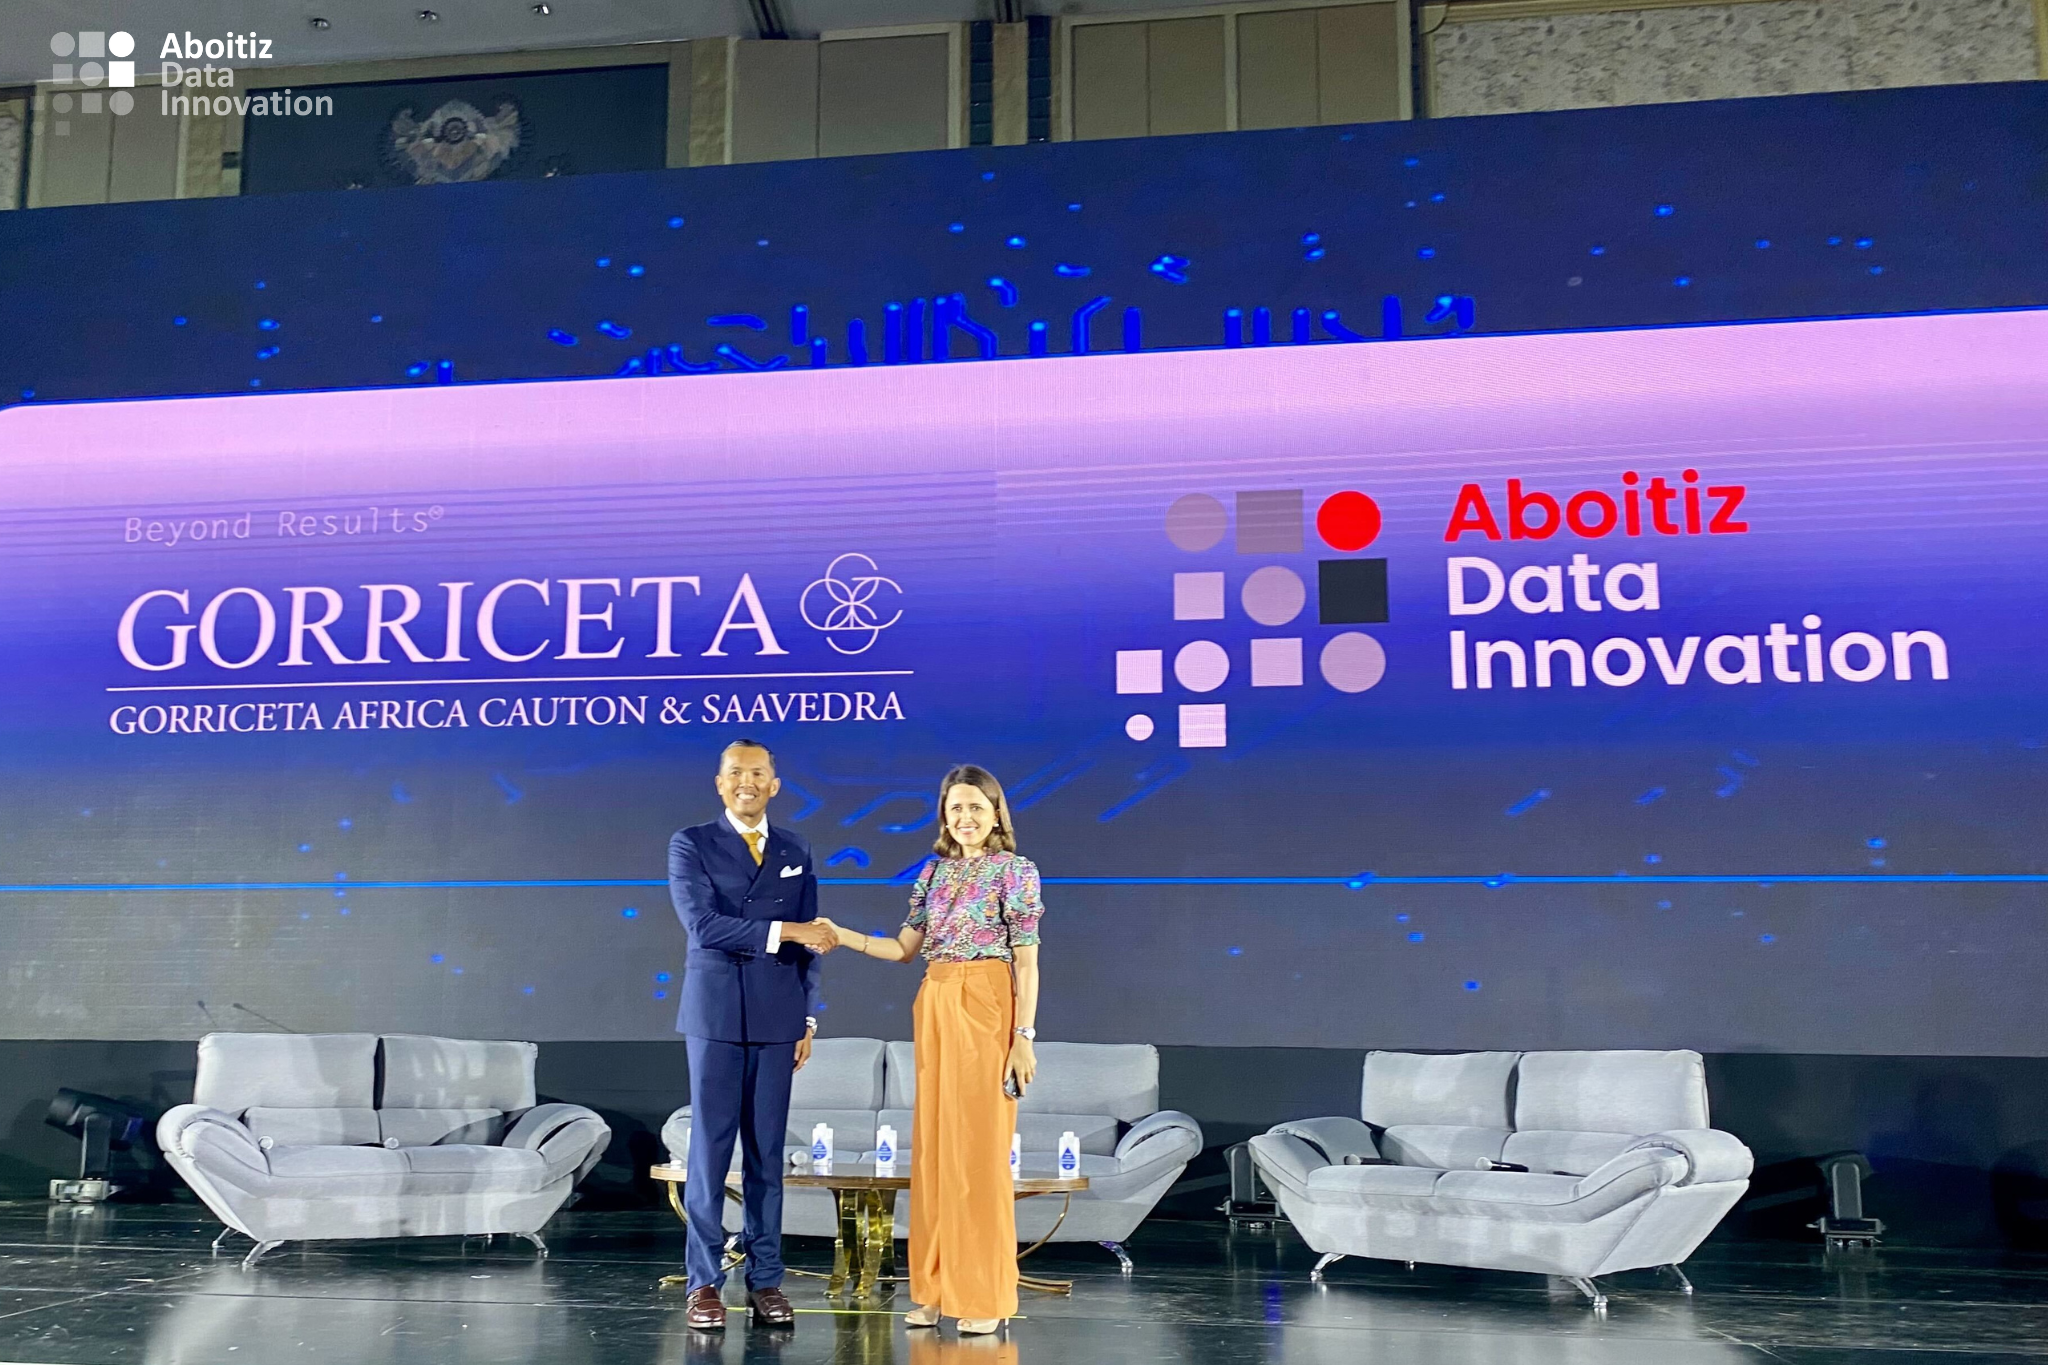 Aboitiz Data Innovation and leading PH tech law firm Gorriceta Africa Cauton & Saavedra team up to reshape the legal industry with responsible AI